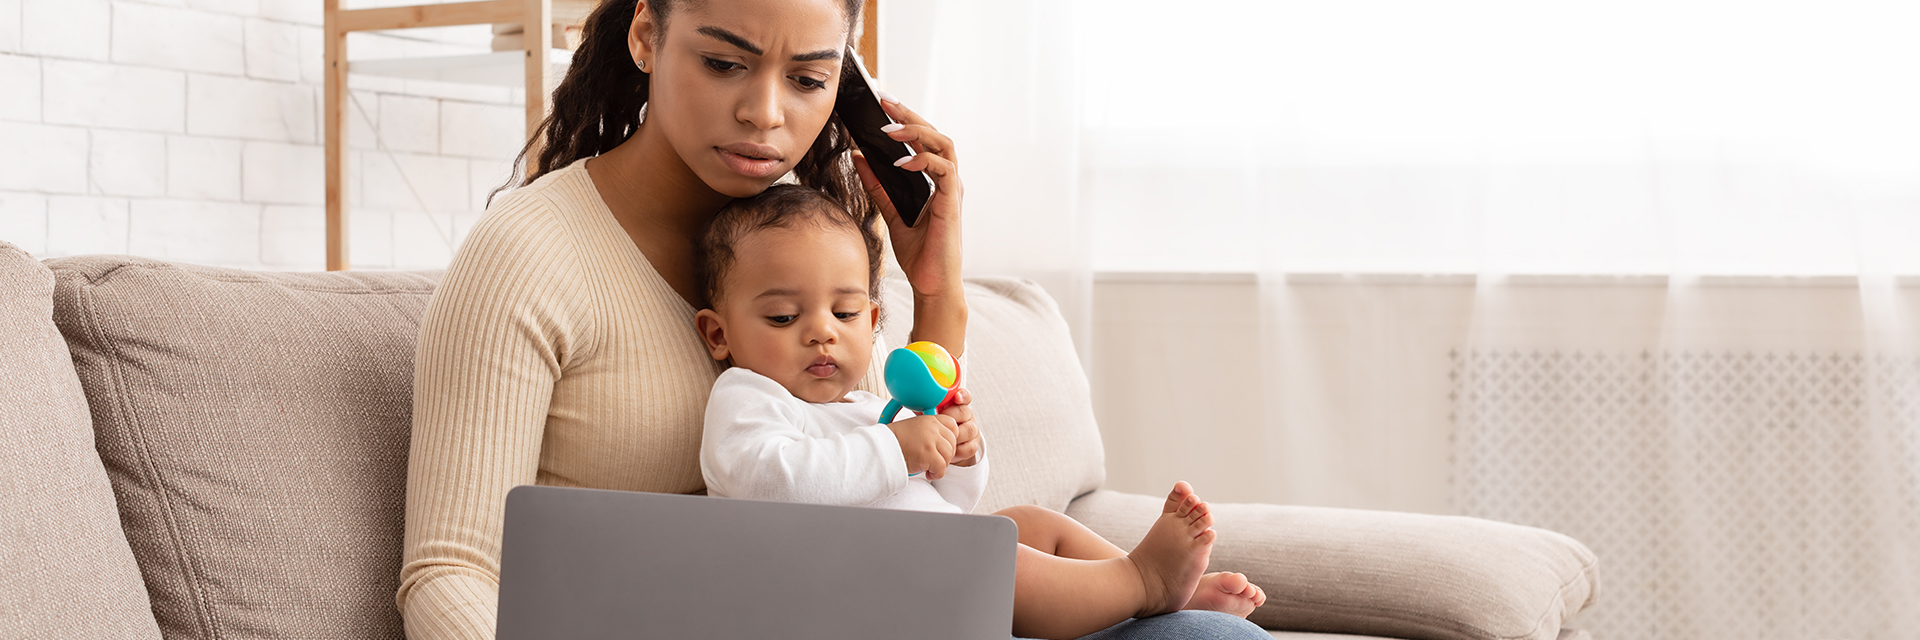 Mom holding baby on couch with laptop